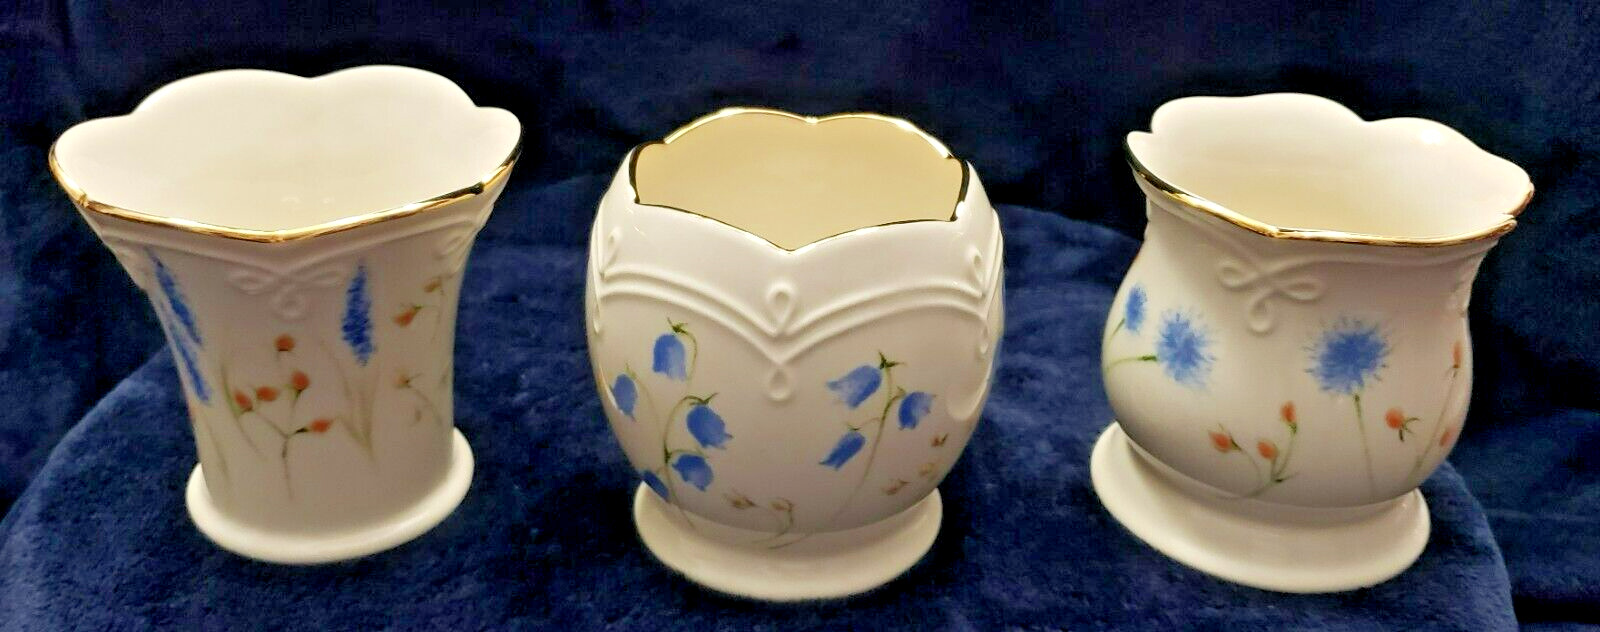 Lenox Set Of 3 Floral Votive Candle Holders with Gold Trim New Without Box